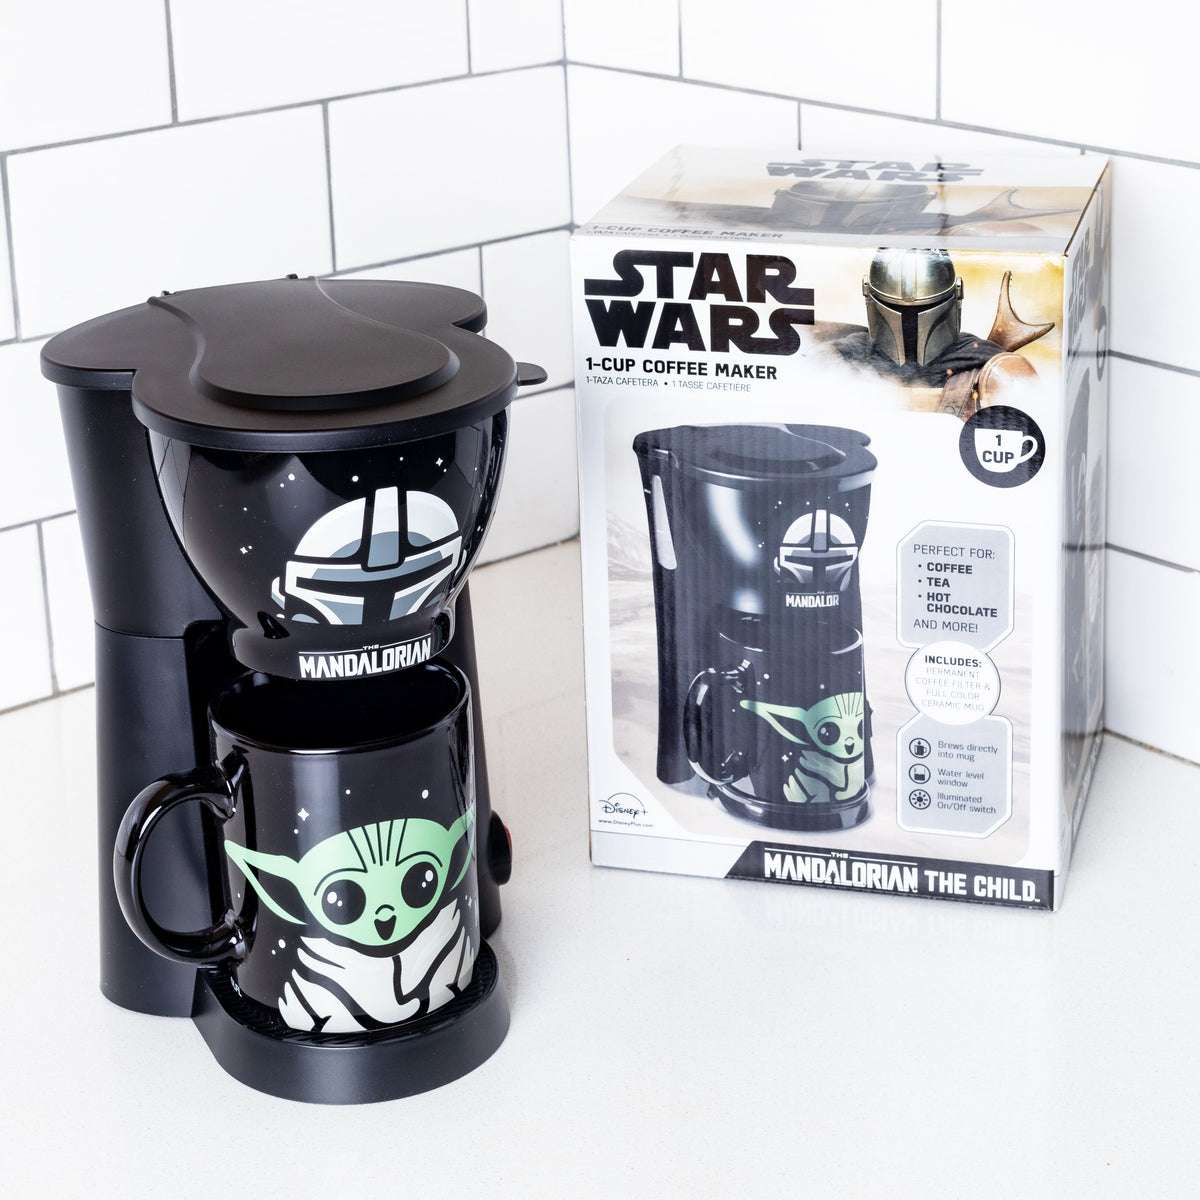 You Can Get a 'Star Wars: The Mandalorian' Coffee Maker, Complete